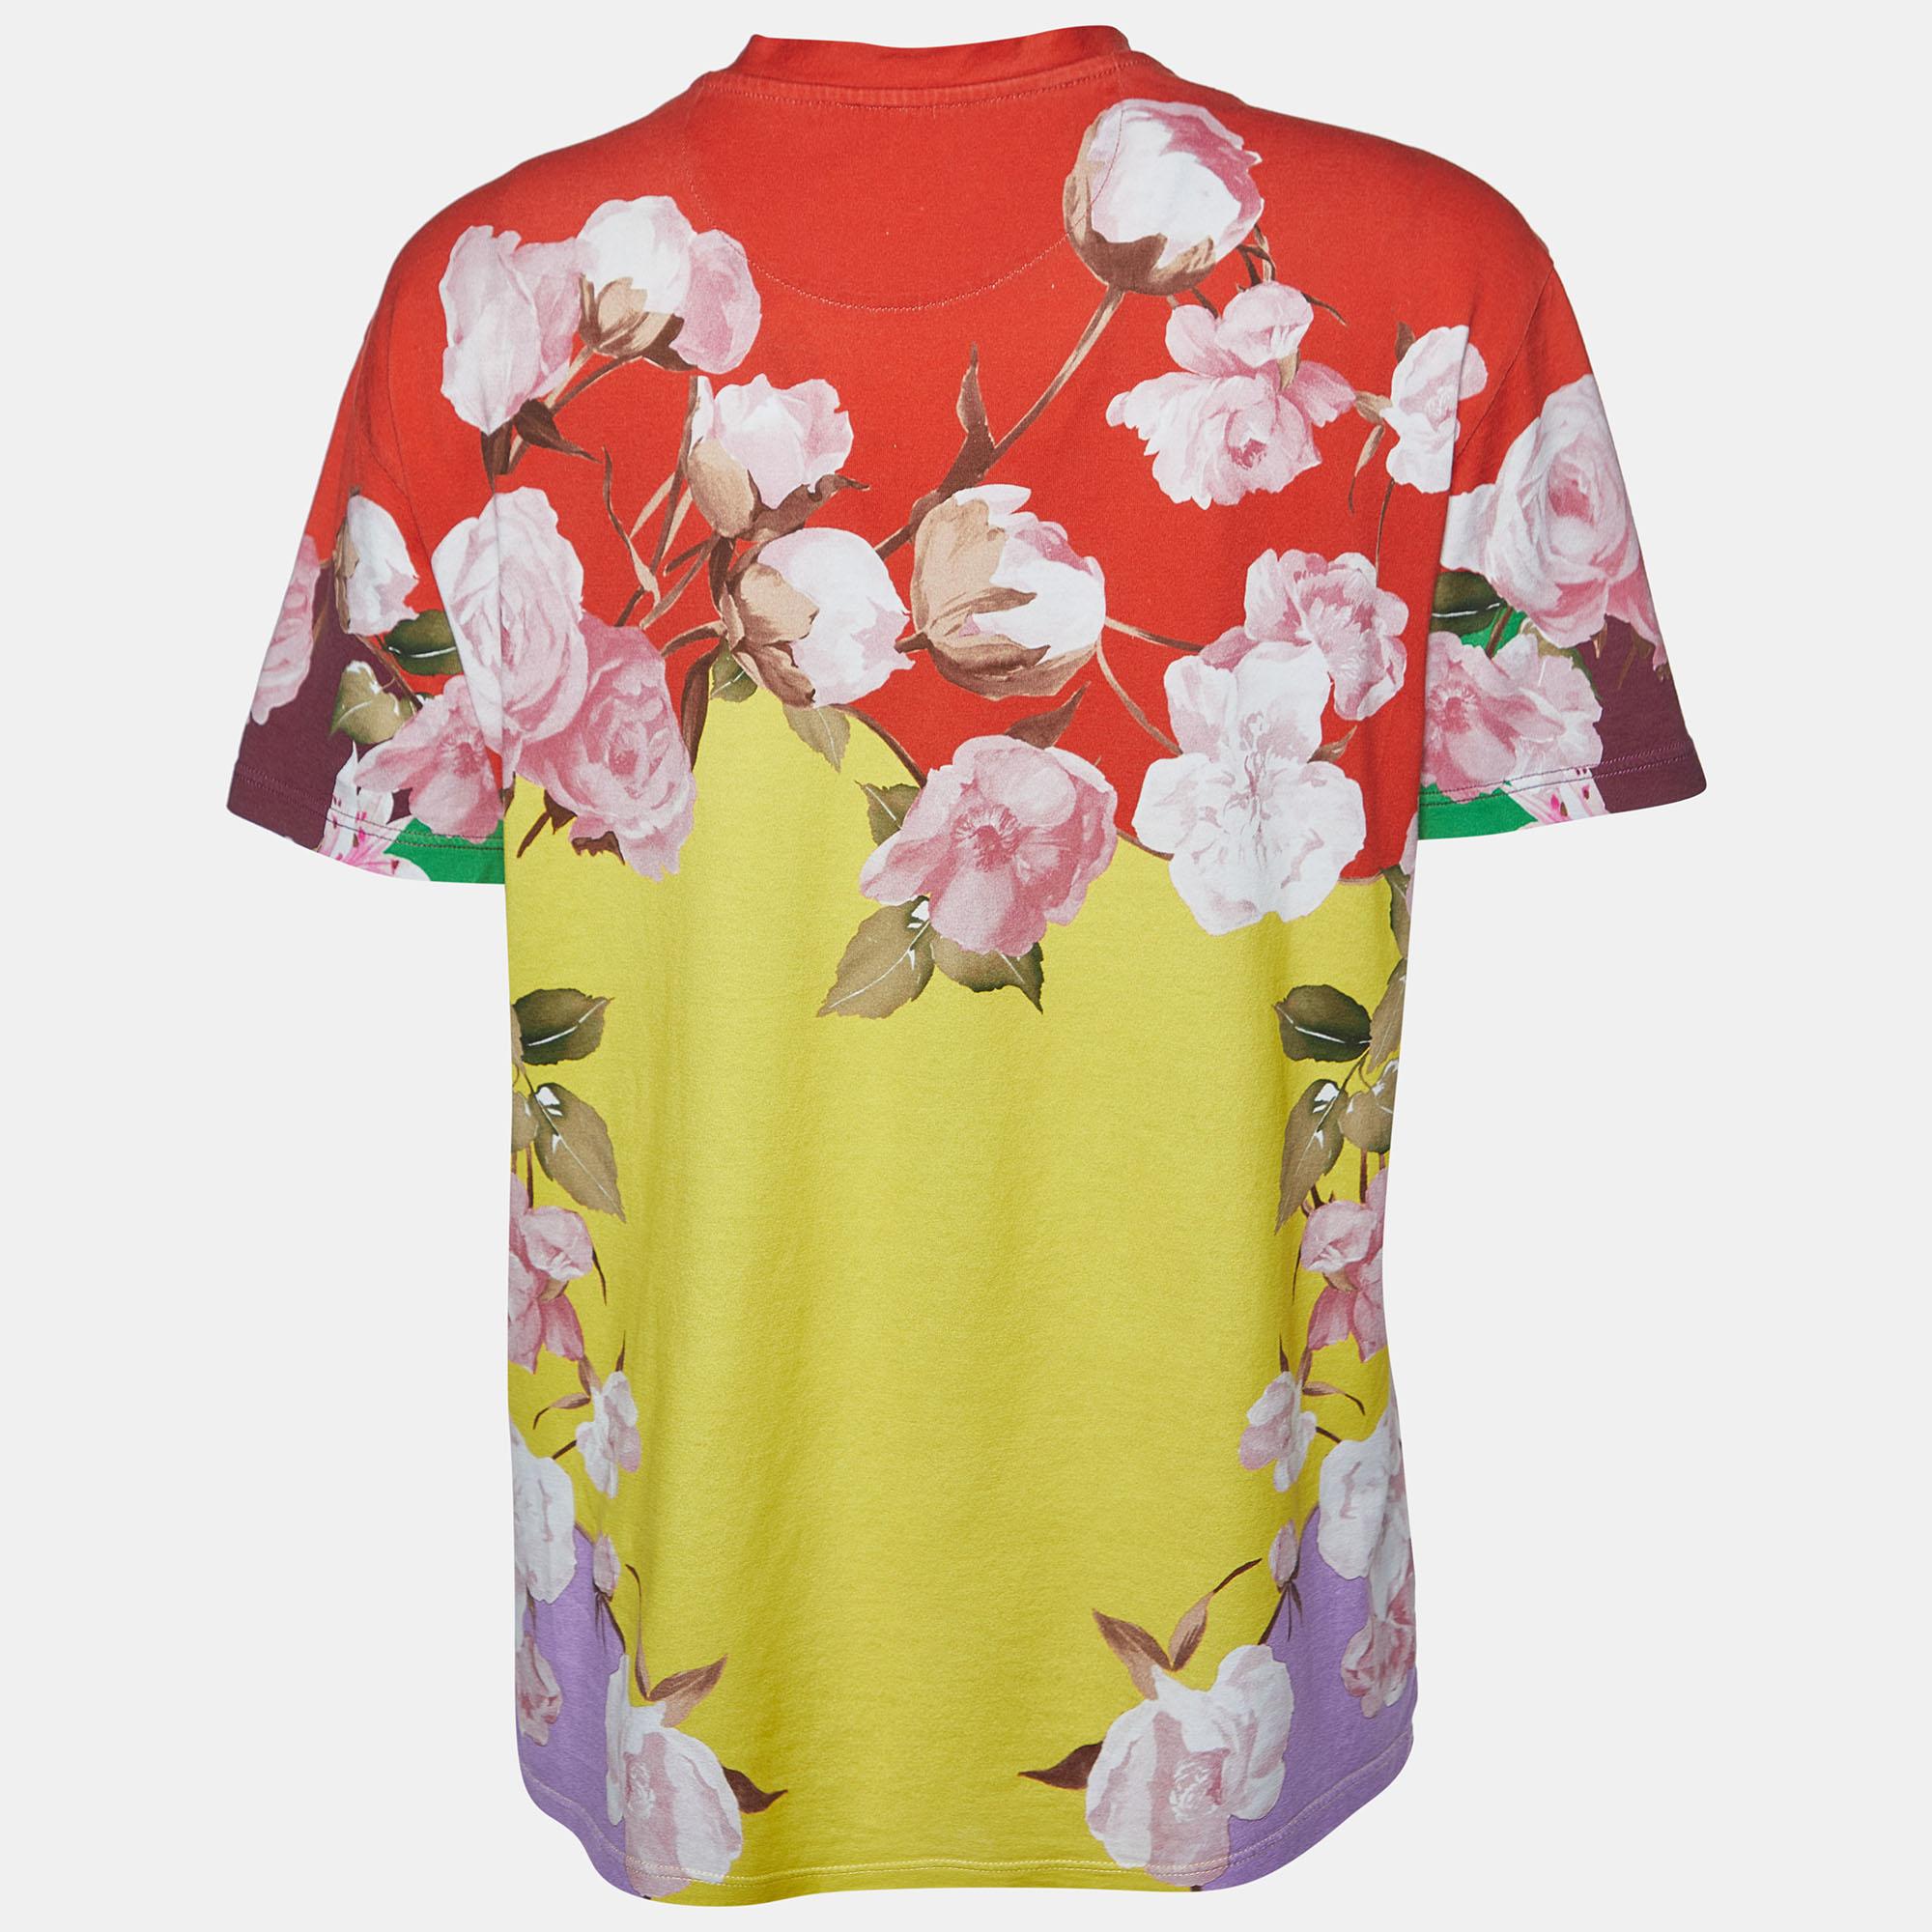 A perfect combination of comfort, luxury, and style, this Valentino floral t-shirt is a must-have piece! Made from quality materials, the creation can be styled with denim pants and sneakers for a cool look.

